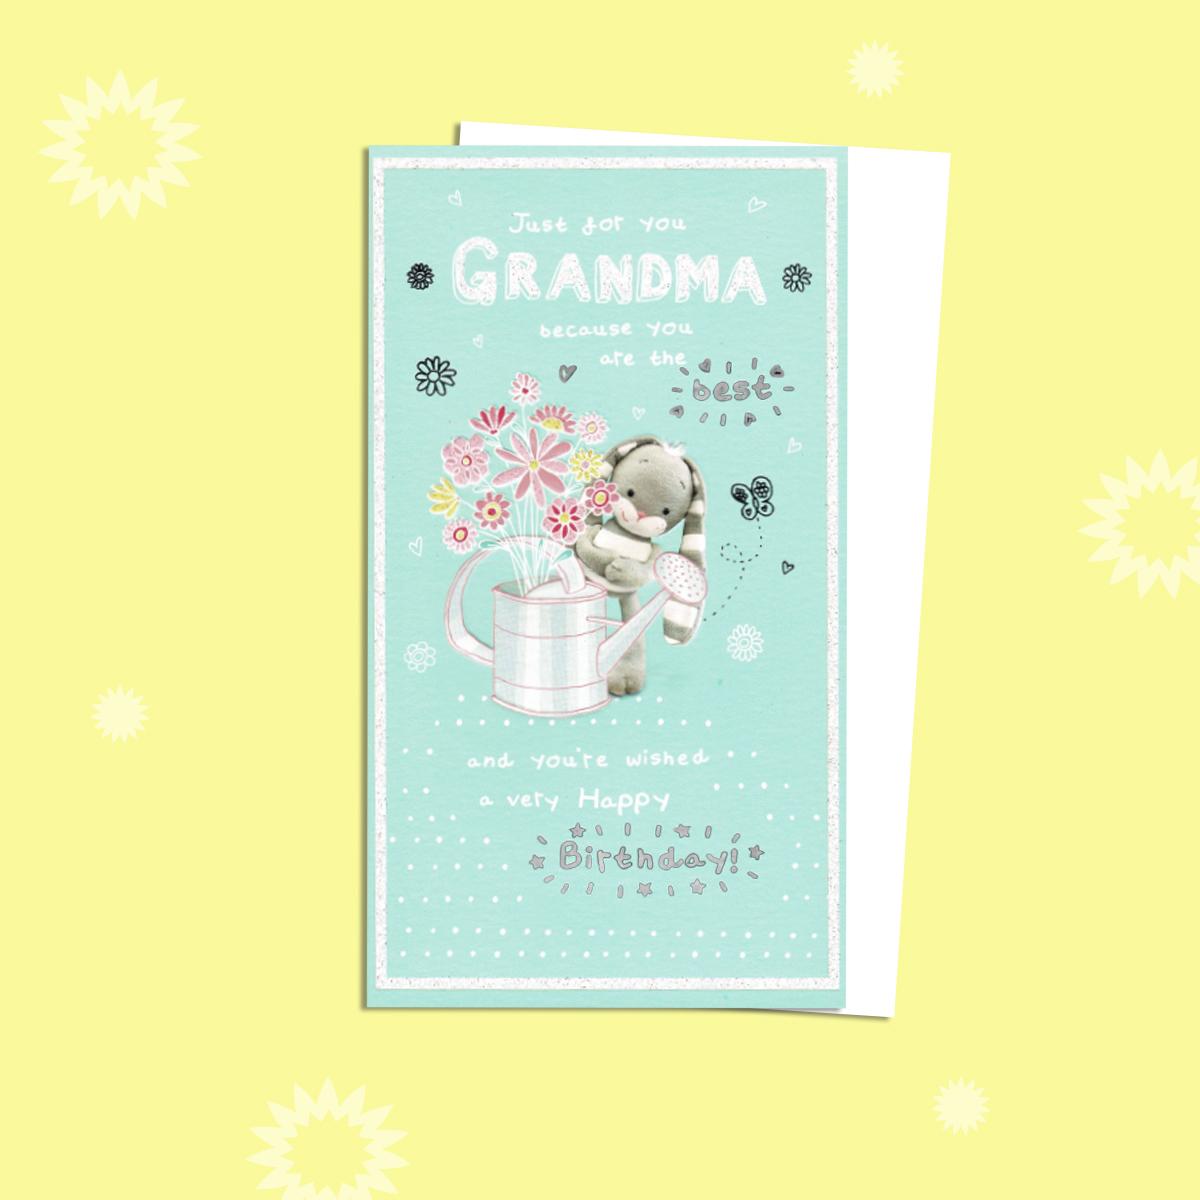 Grandma Birthday Card Featuring A Cute Bunny With A Watering Can